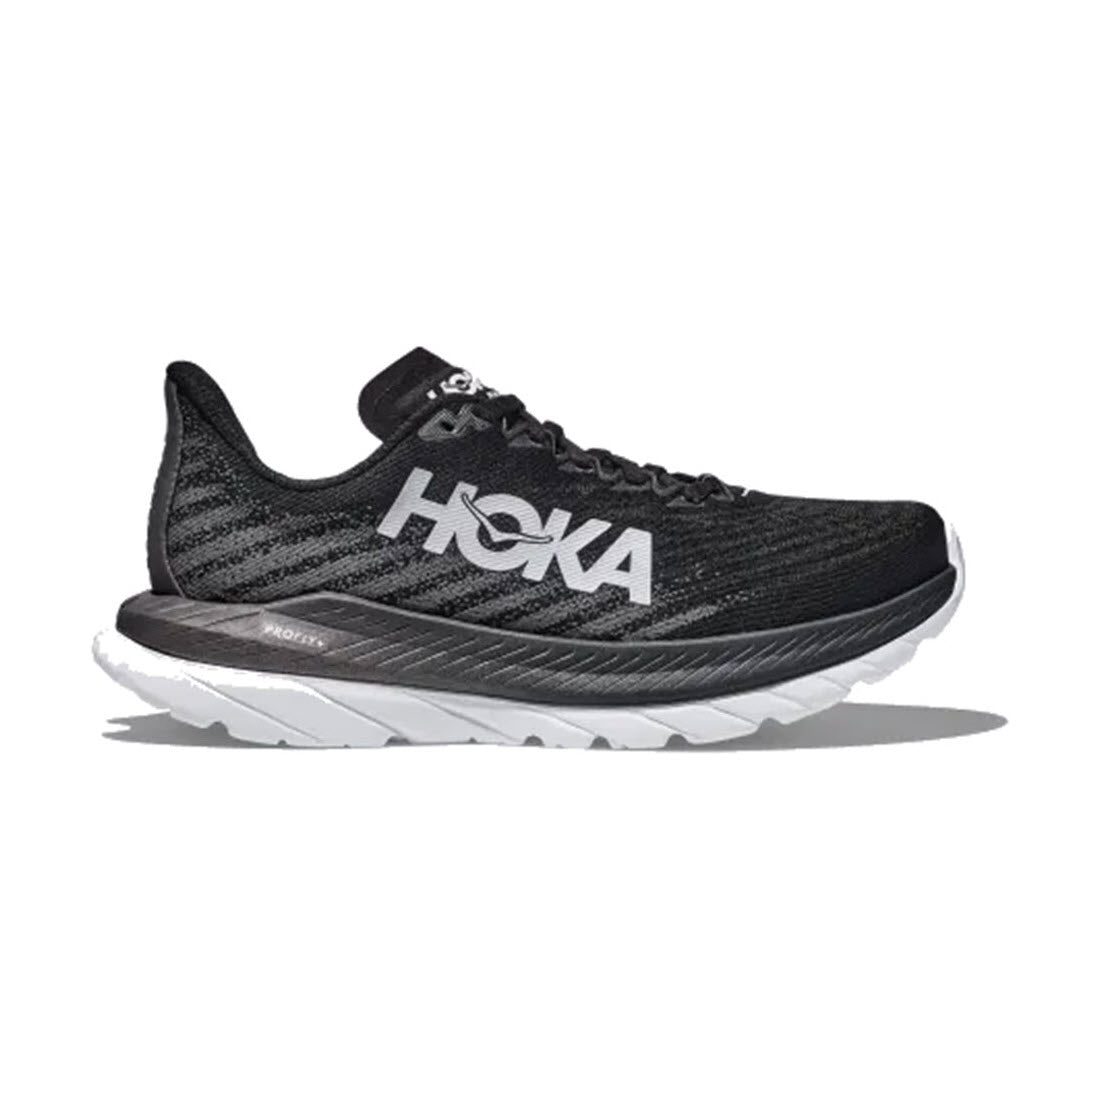 A single Hoka Mach 5 Black/Castlerock - Mens running shoe, showcasing a thick, rubberized EVA sole and the logo prominently displayed on the side.